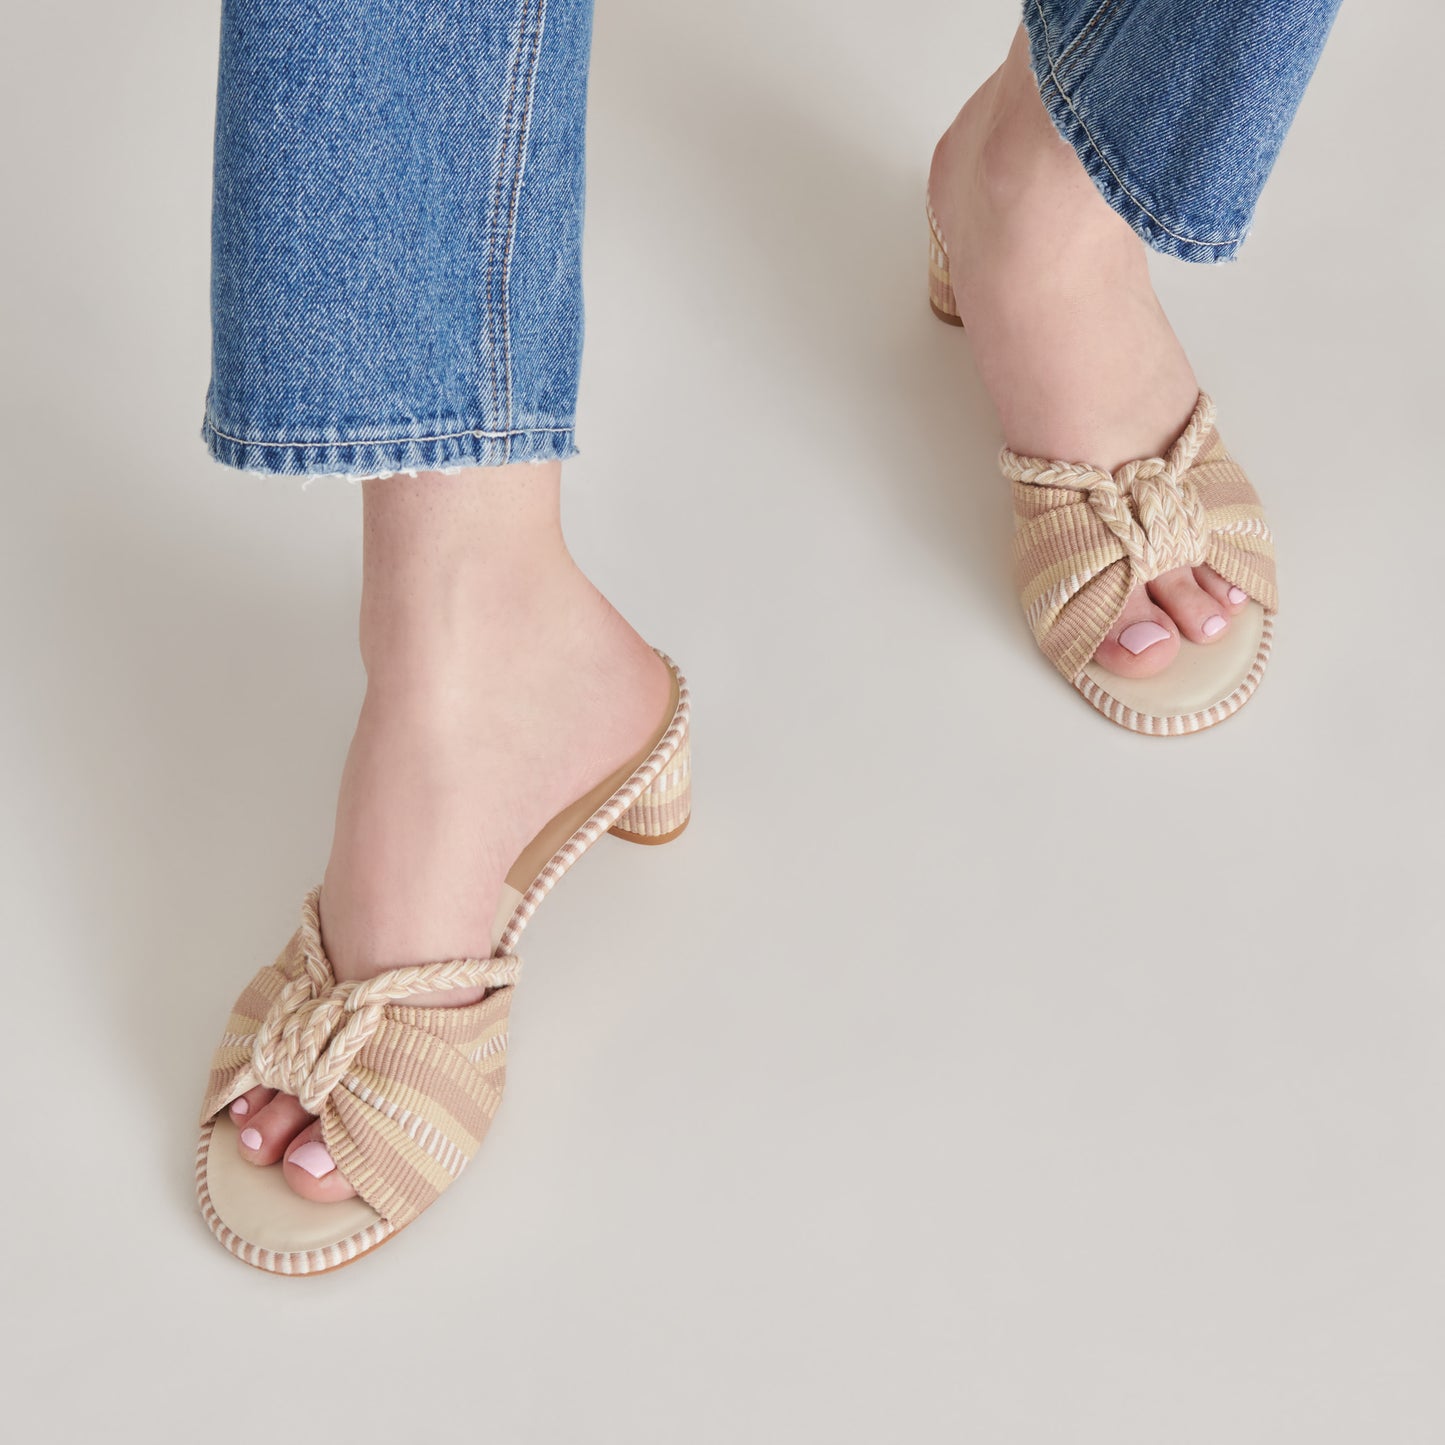 DALLIE HEELS NATURAL MULTI WOVEN